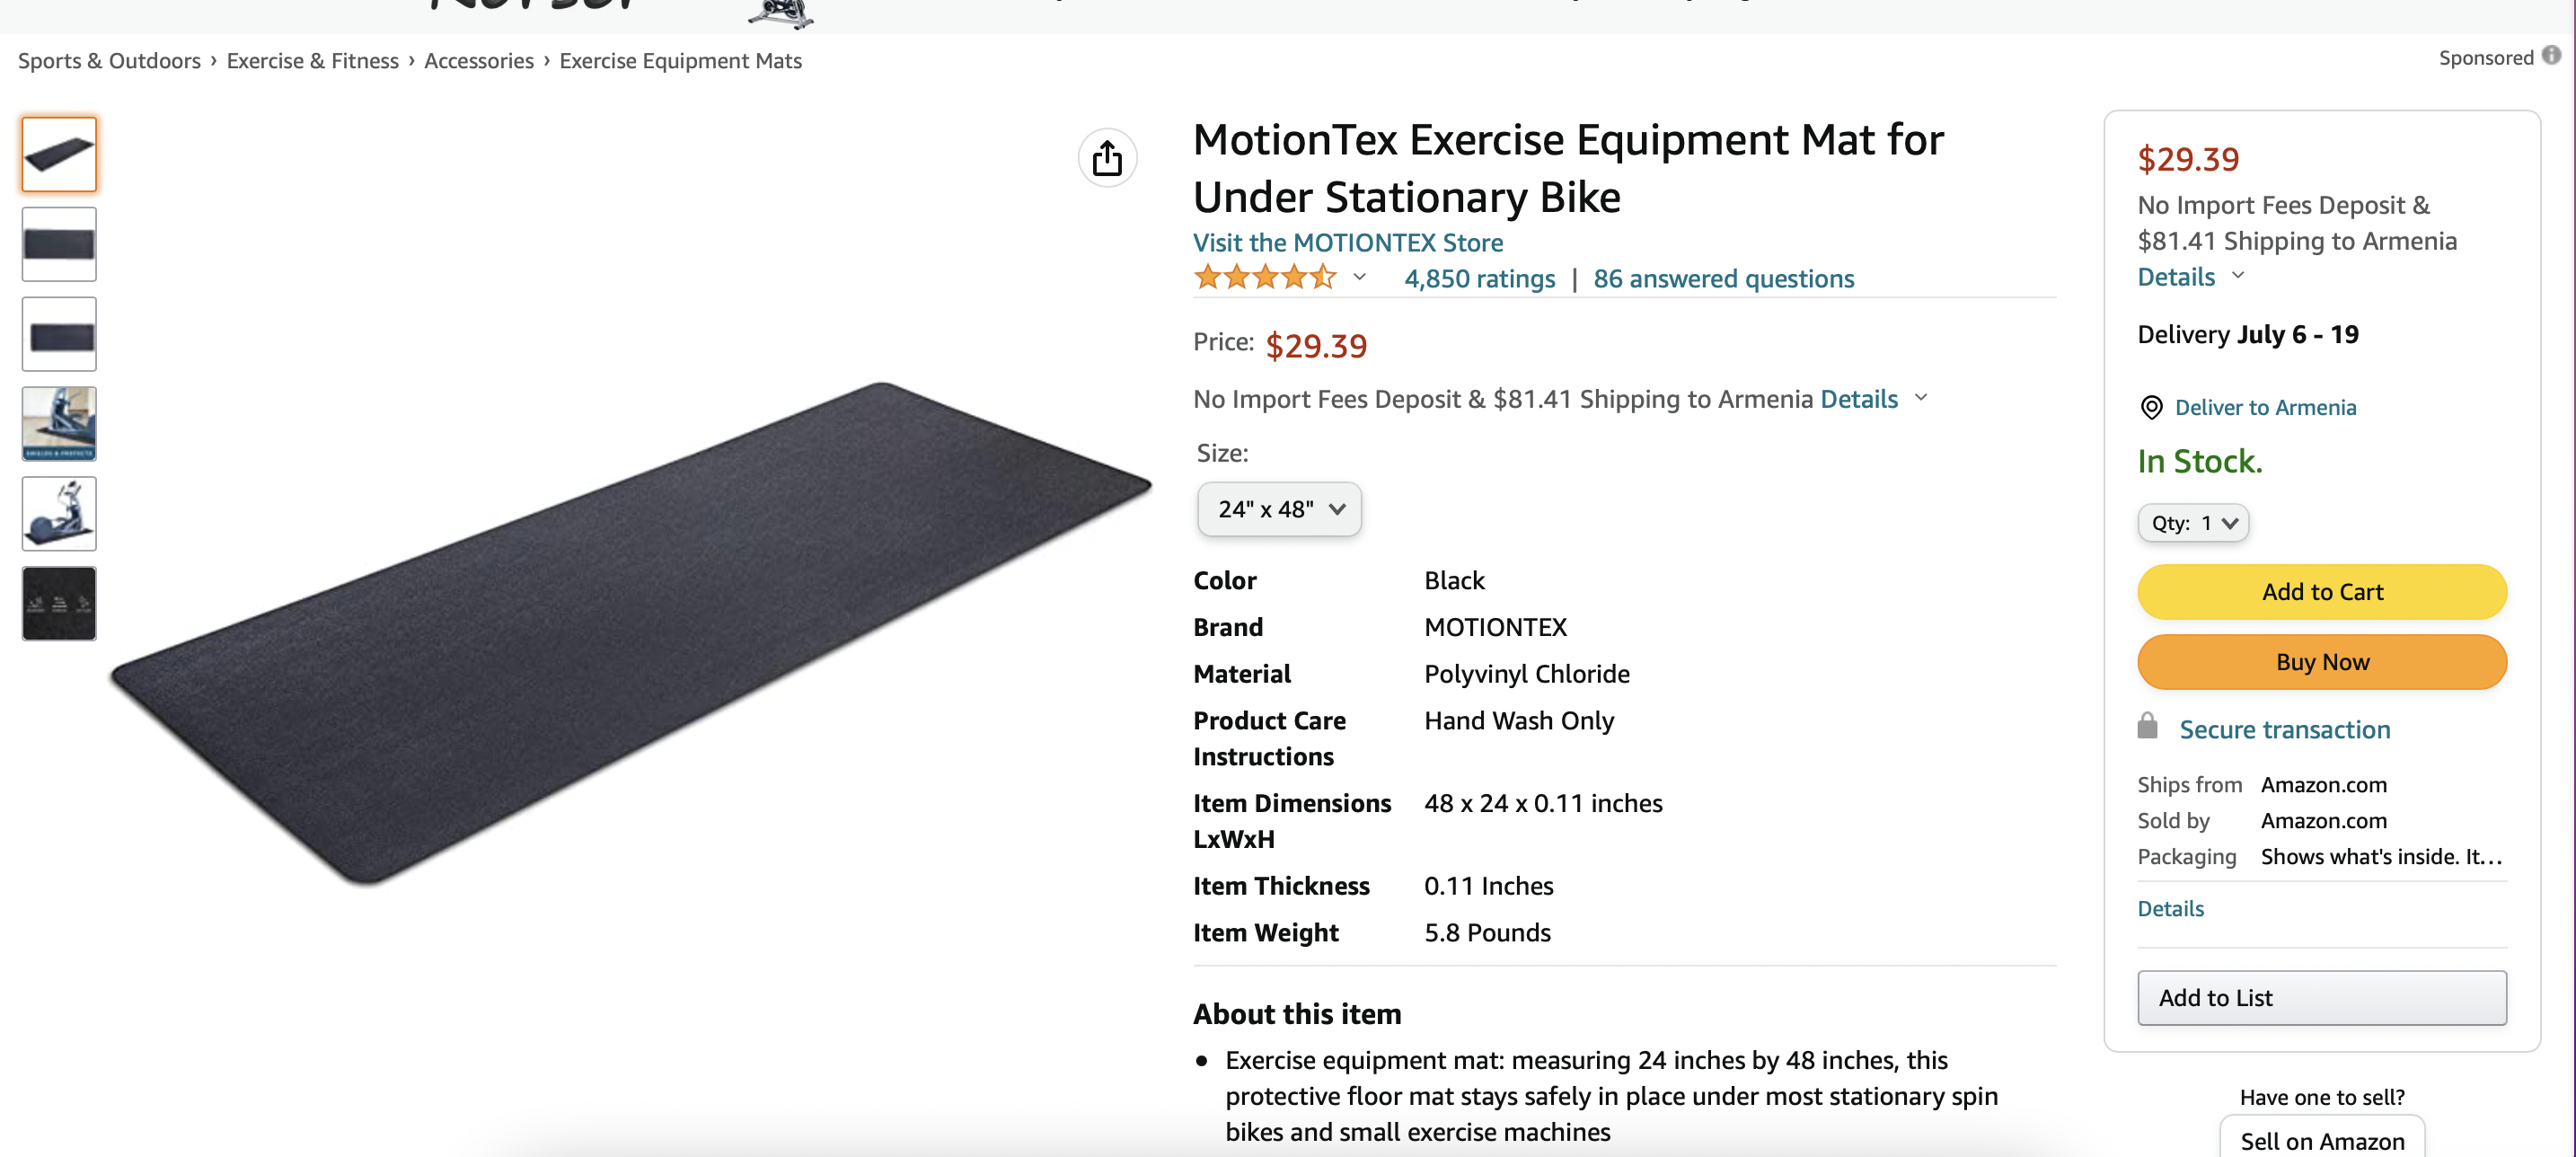 Amazon startup ideas: Workout products